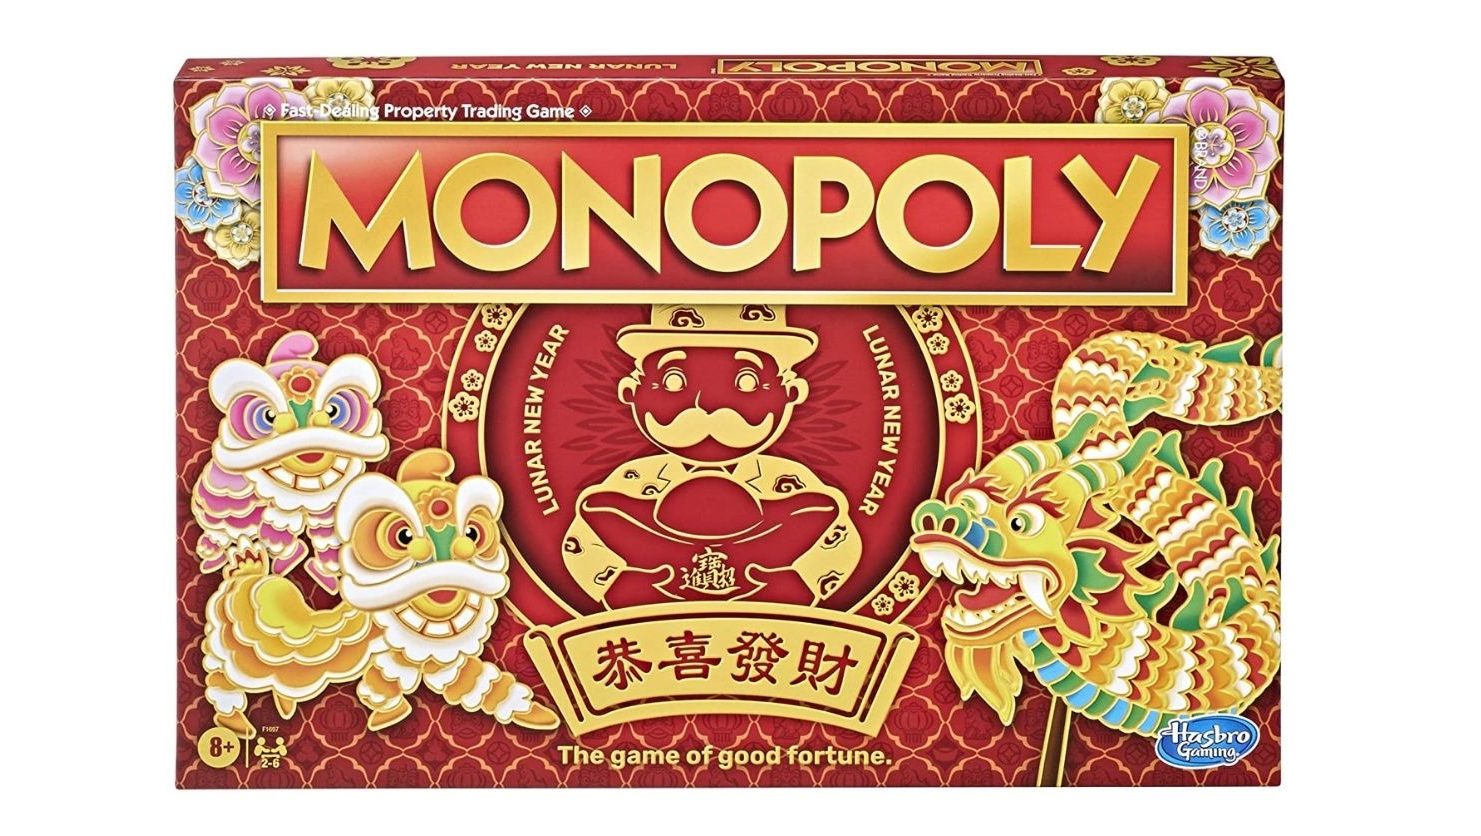 Lunar New Year themed monopoly